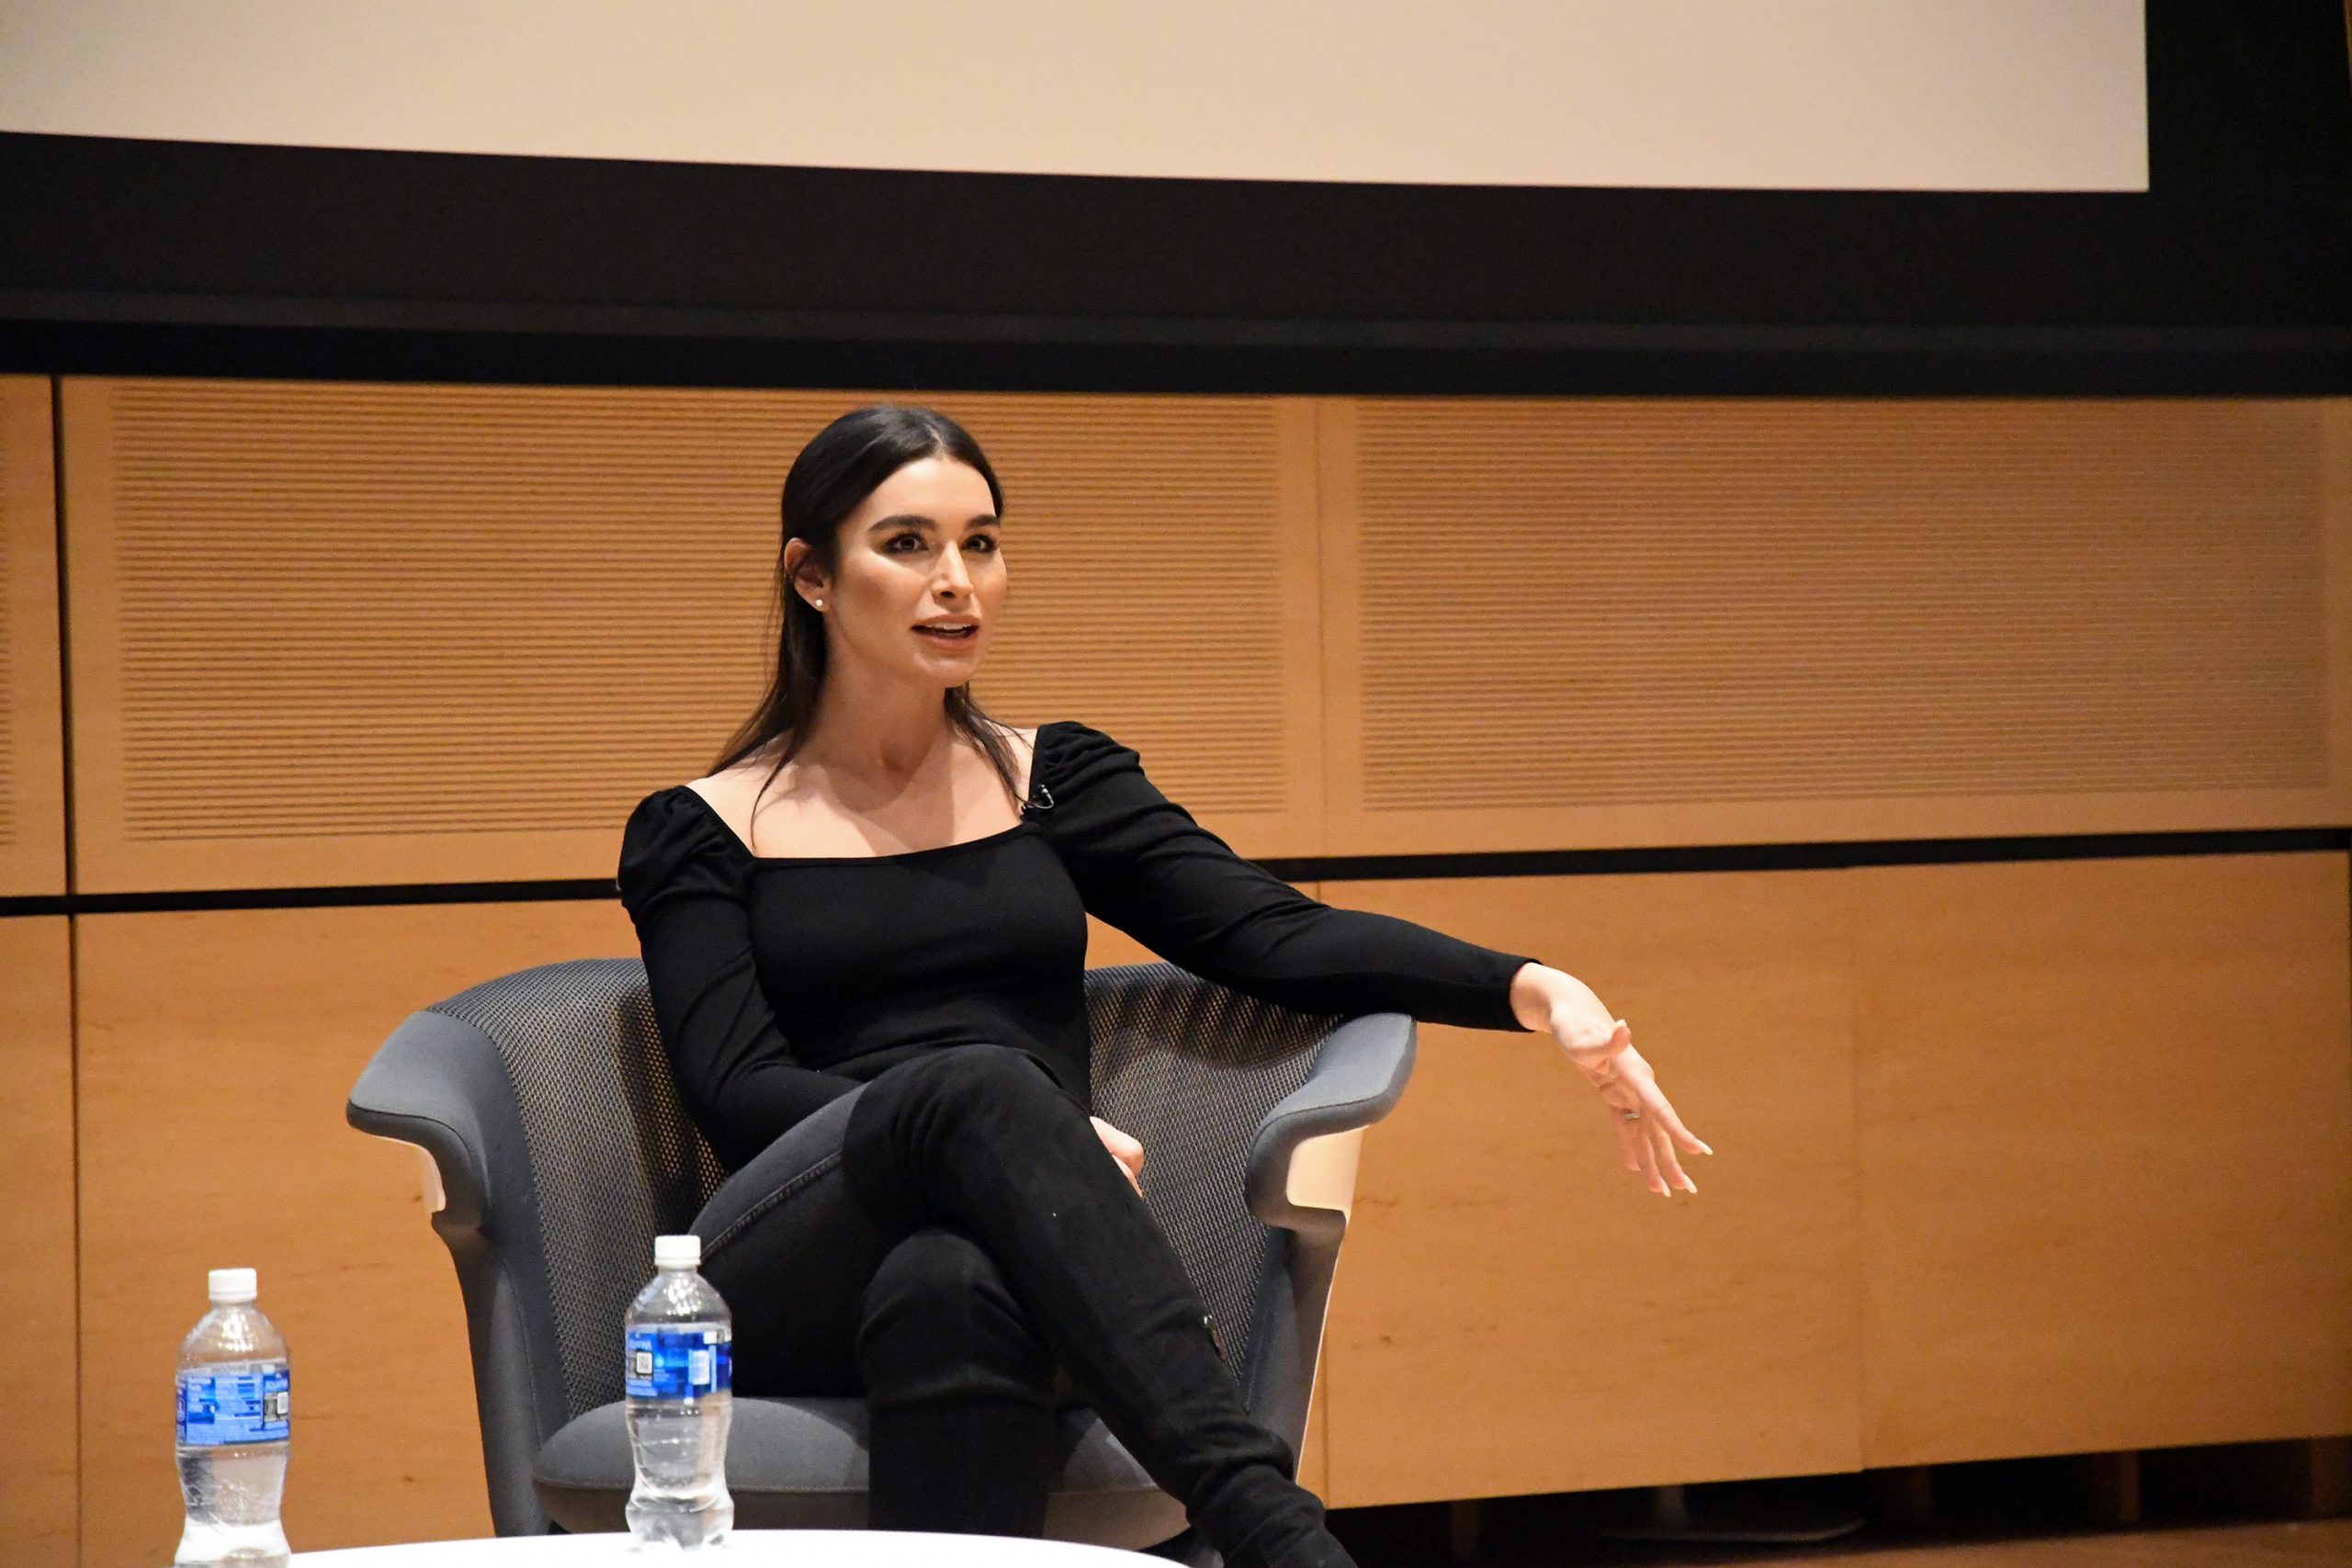 Ashley Iaconetti Haibon spoke to students about her career in communications after "The Bachelor" on Tuesday, December 3.